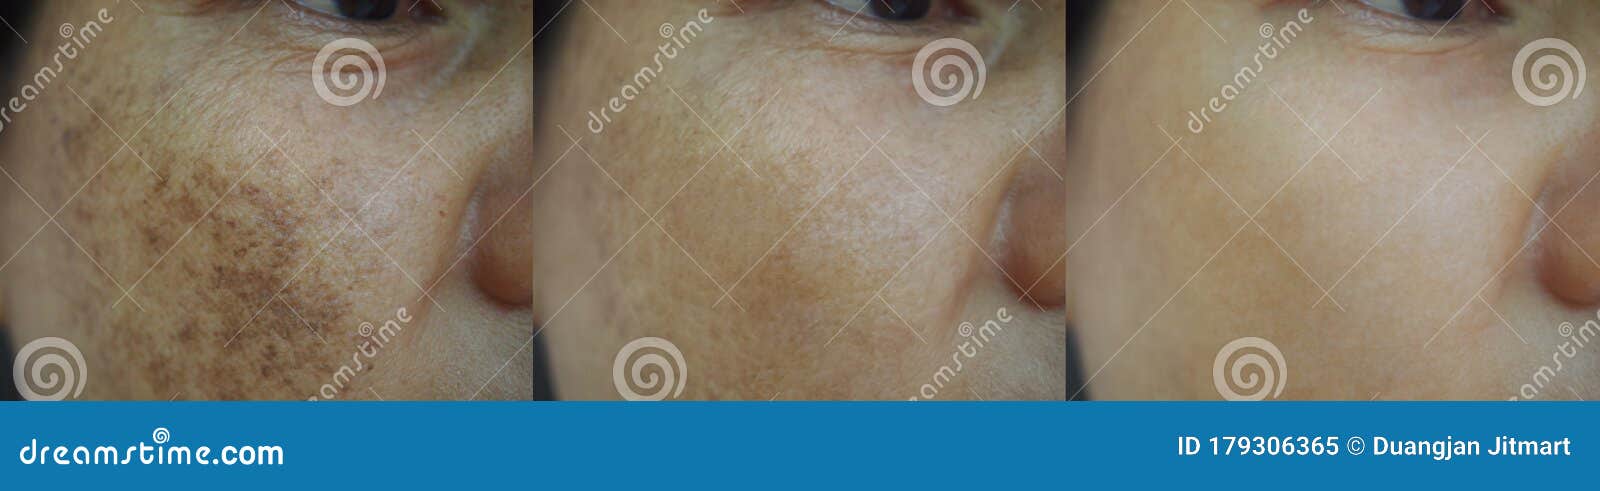 before and after spot melasma treatment